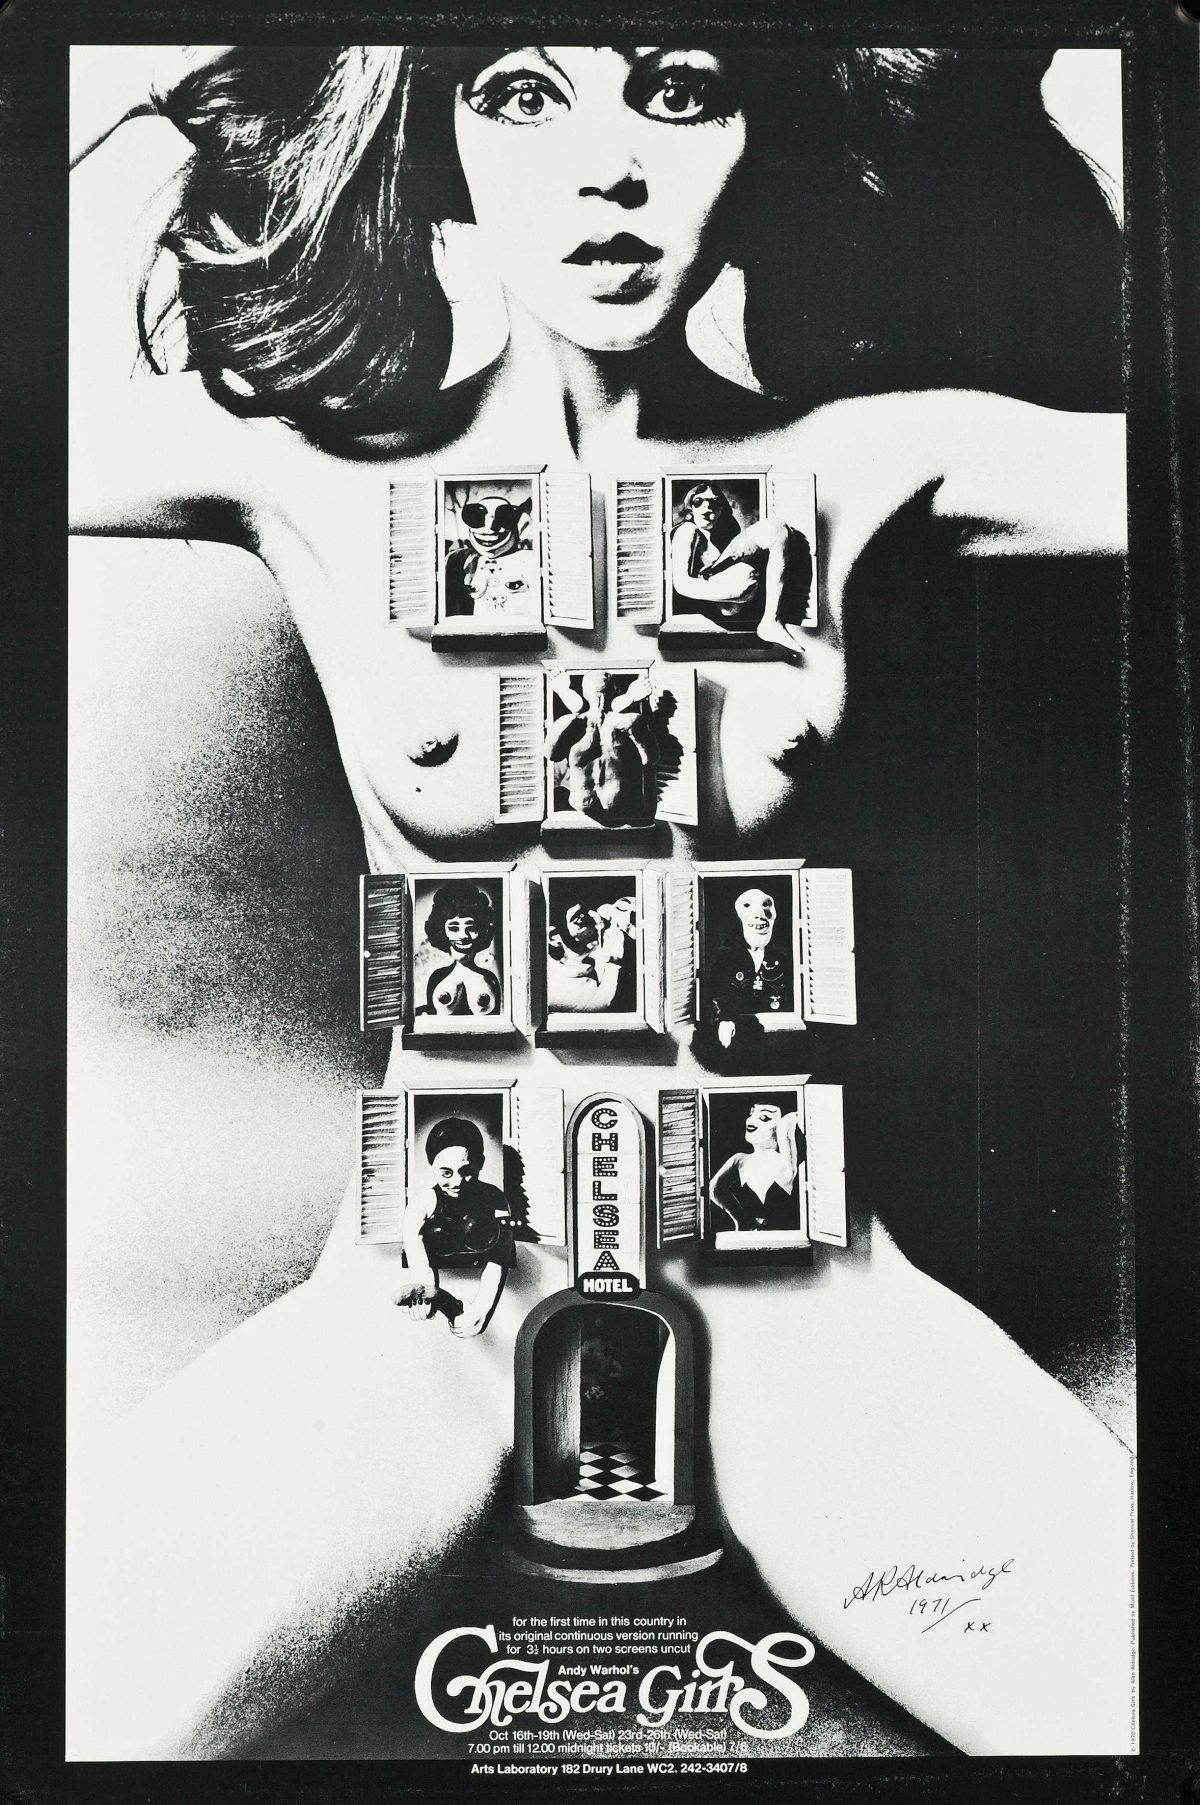 Black and white nude posters